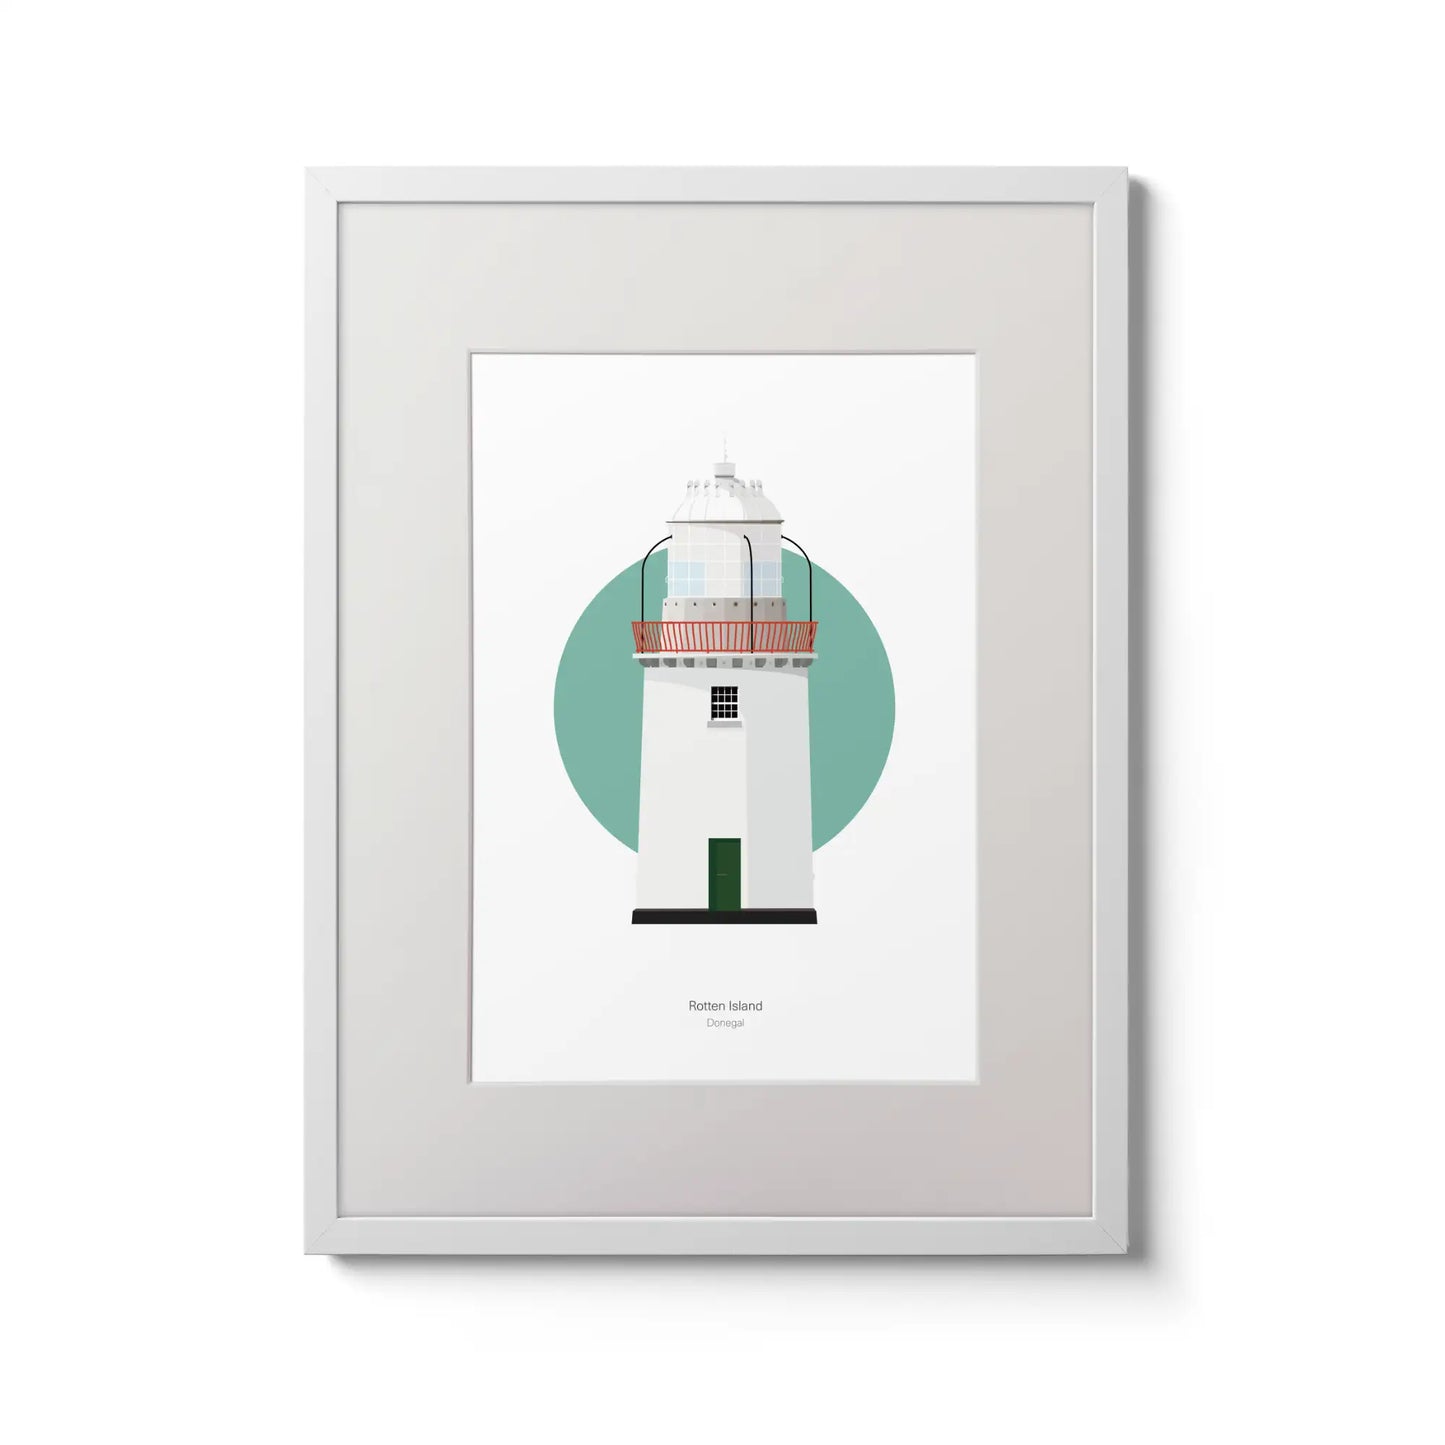 Contemporary wall art decor of Rotten Island lighthouse on a white background inside light blue square,  in a white frame measuring 30x40cm.